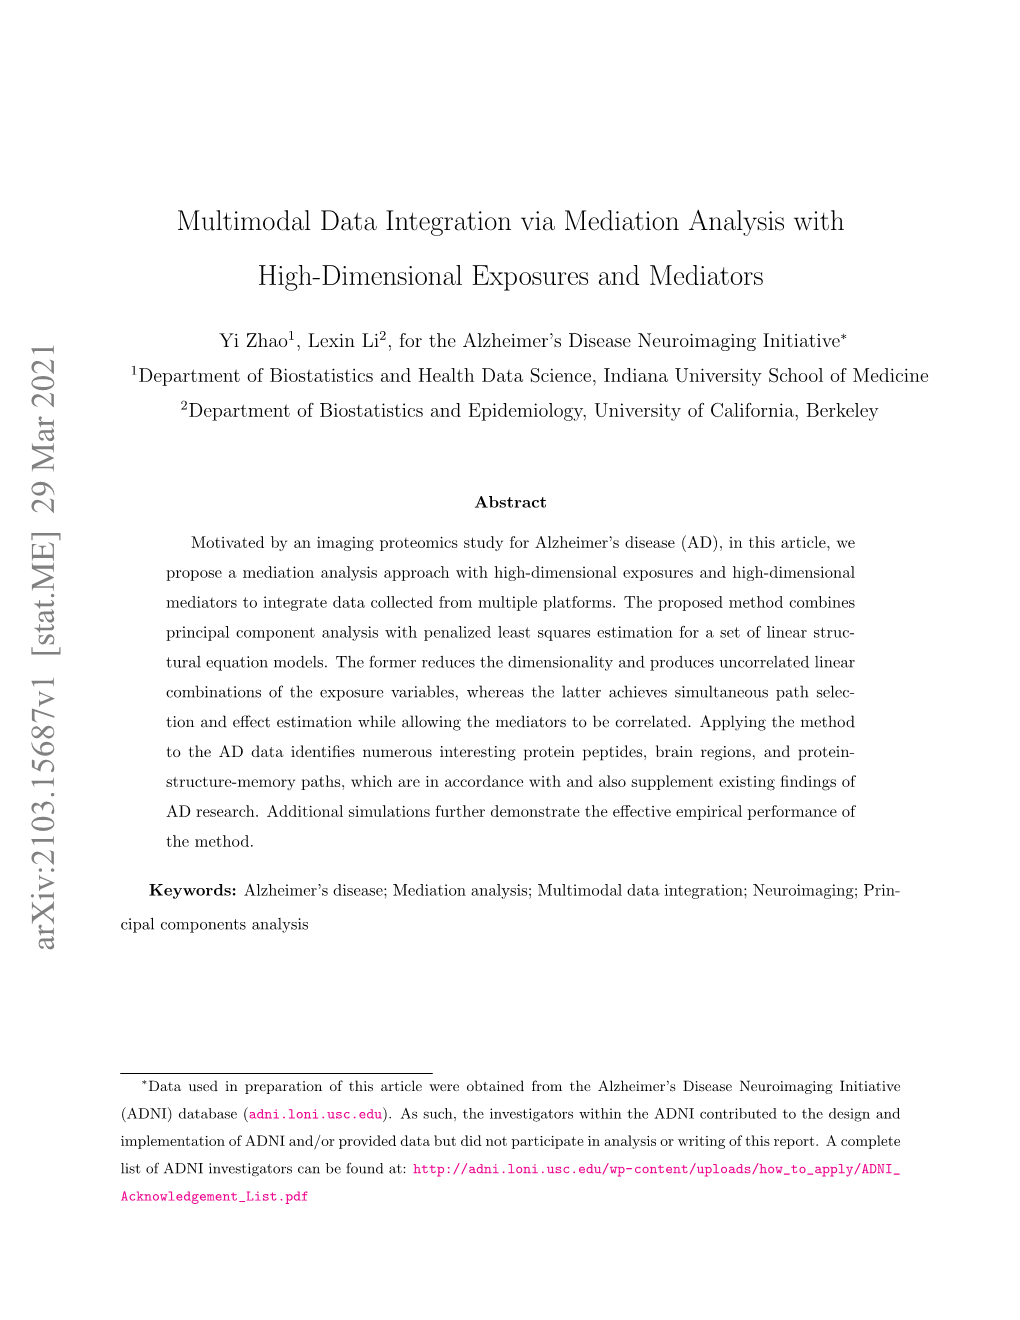 Multimodal Data Integration Via Mediation Analysis with High-Dimensional Exposures and Mediators